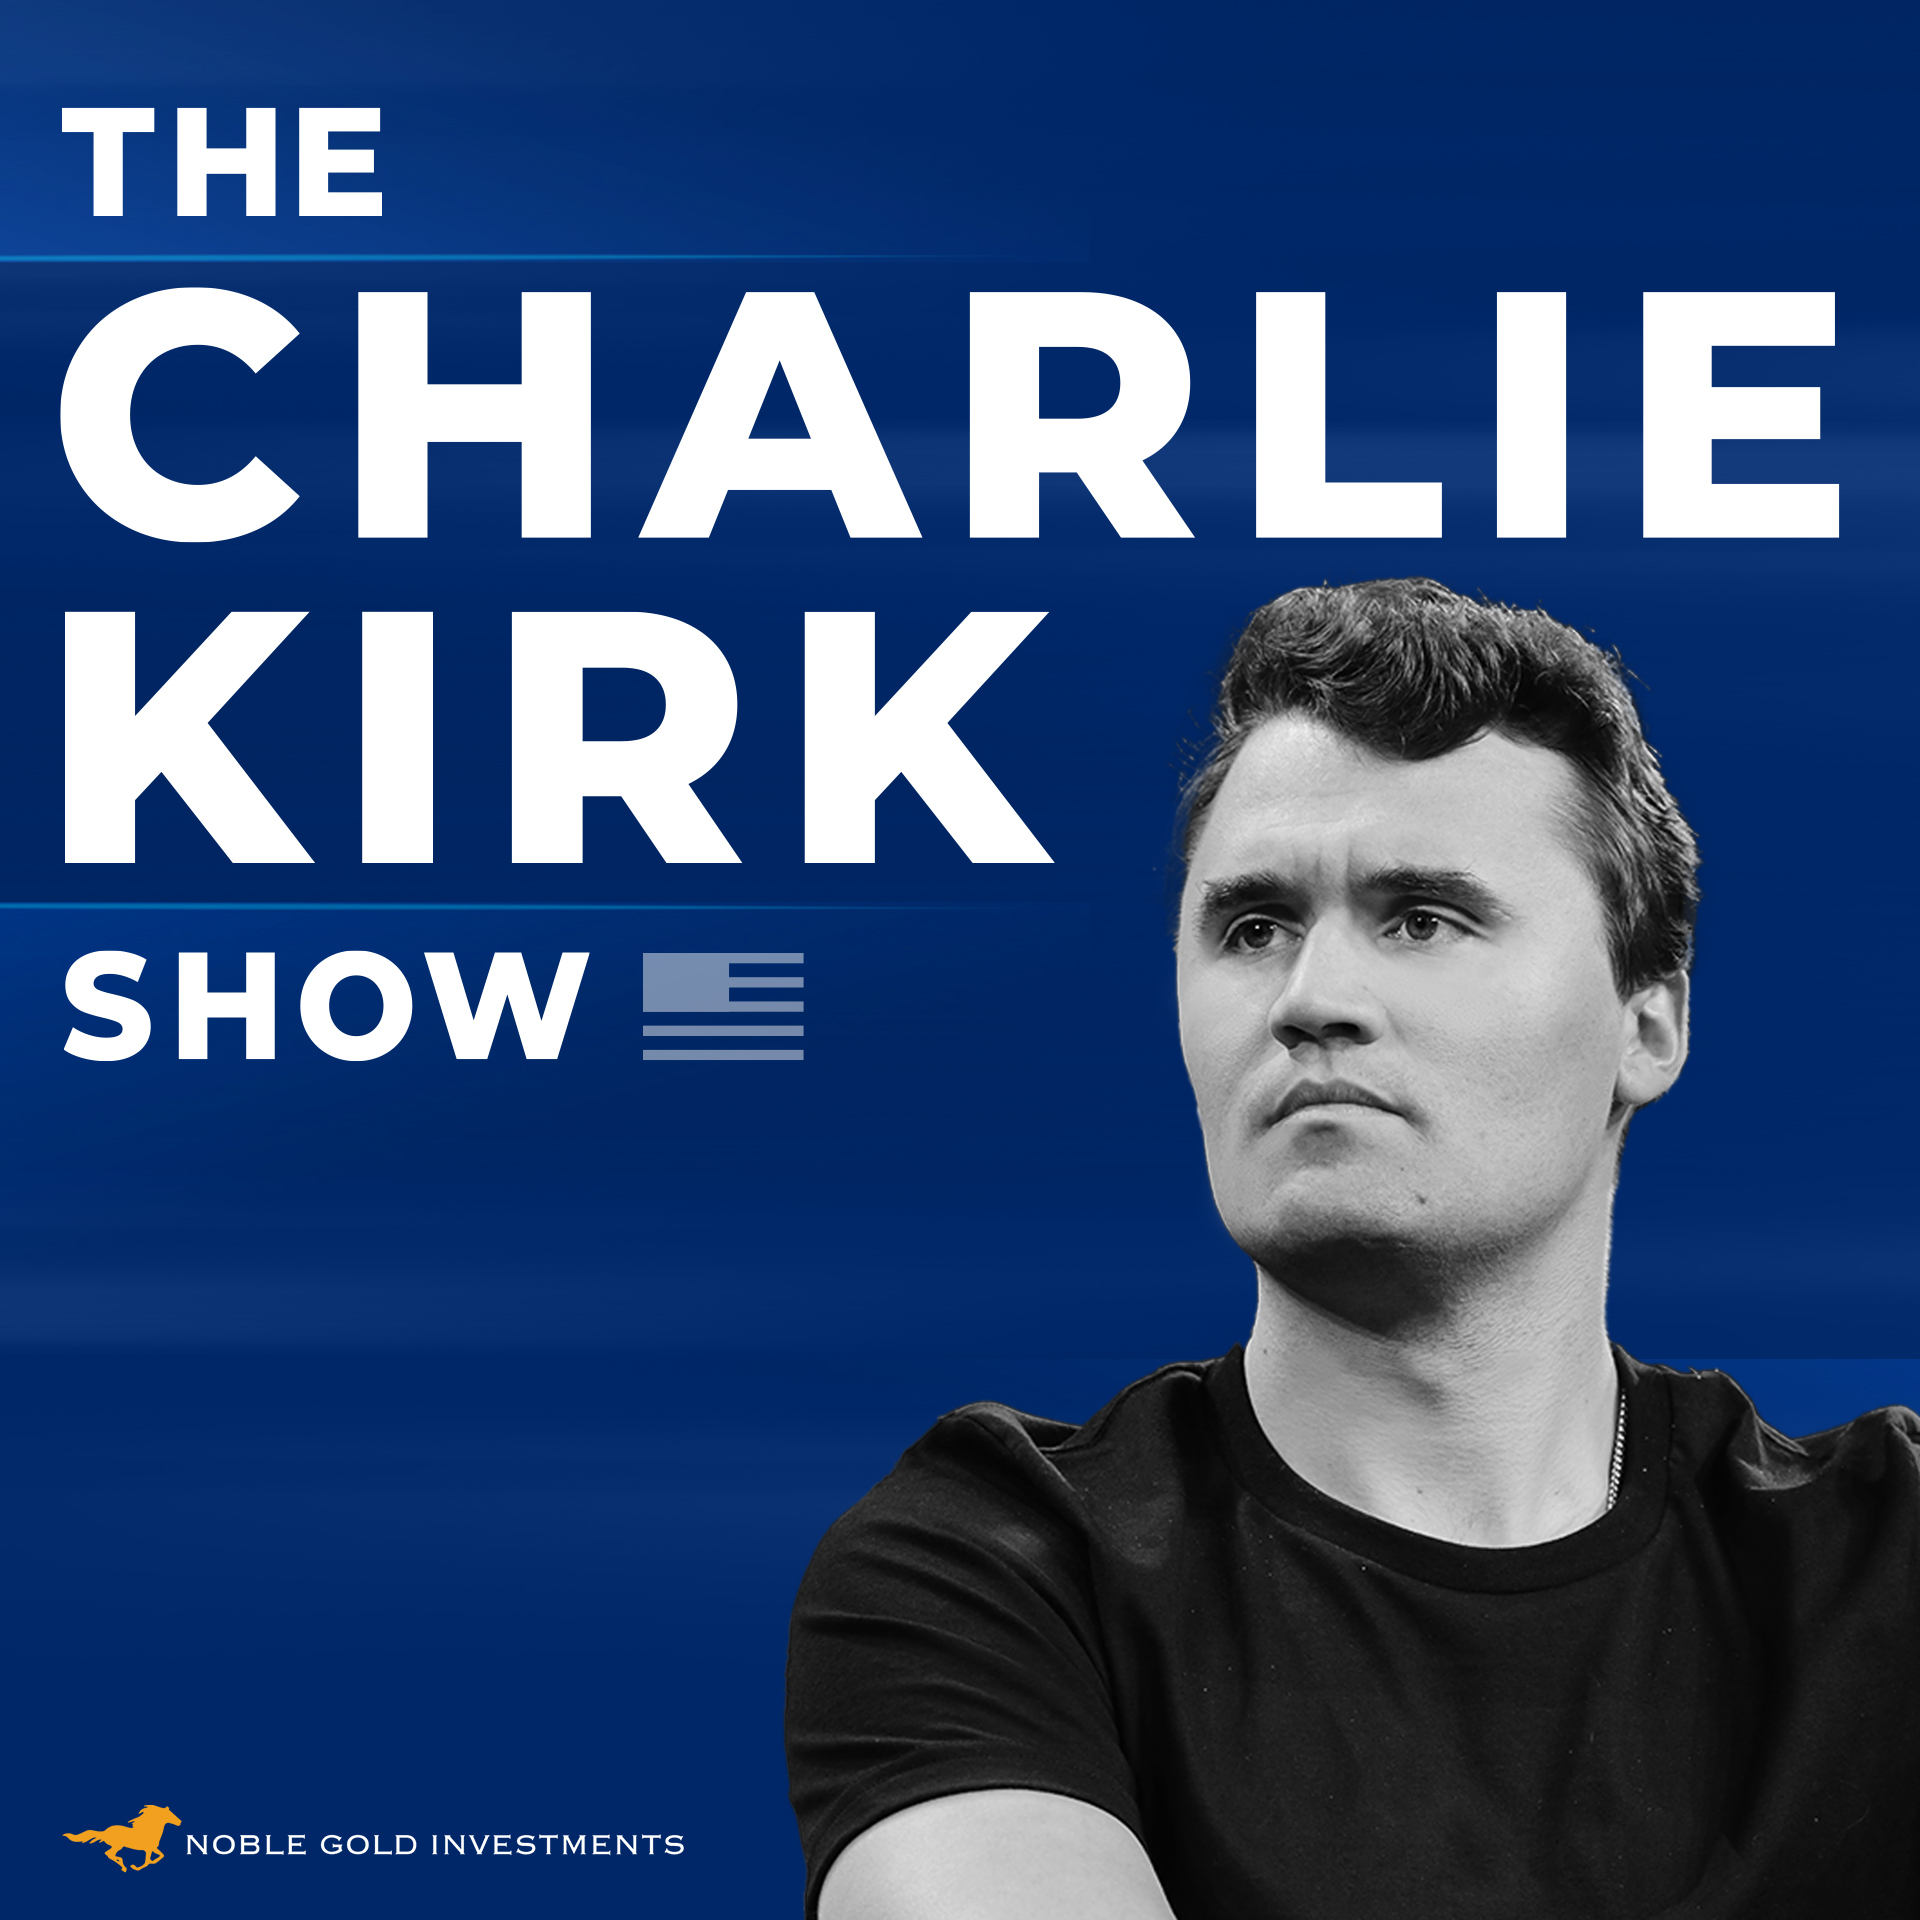 The Charlie Kirk Show Takes on UC-Berkeley — Here’s What We Saw